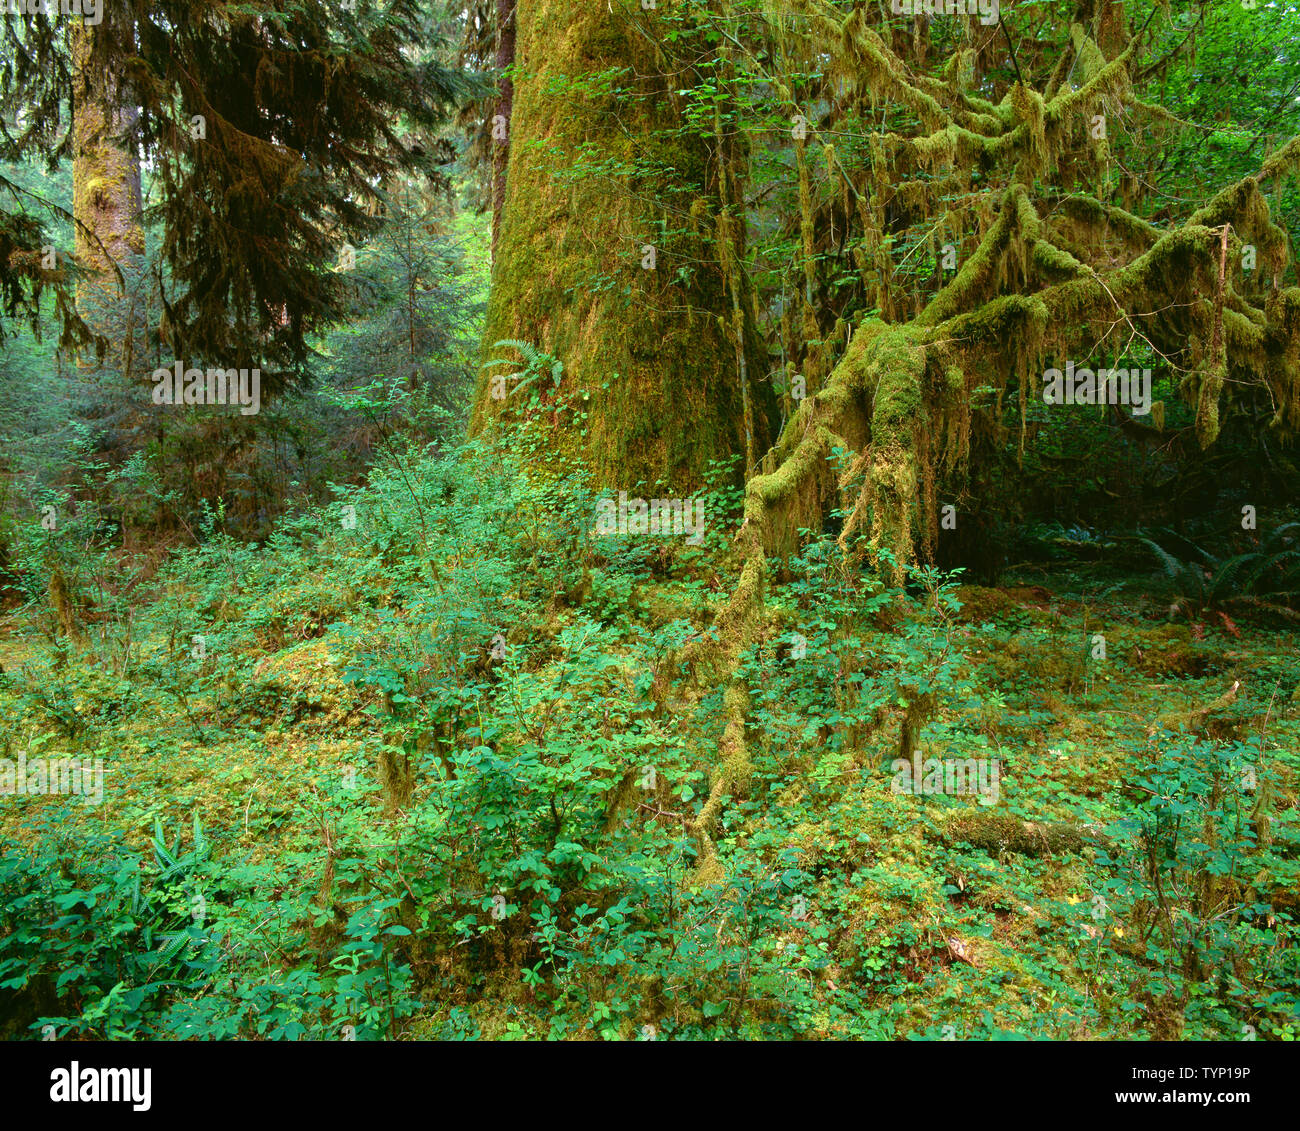 USA, Washington, Olympic National Park, Sitka spruce and moss covered, lush vegetation in the Hoh Rain Forest. Stock Photo